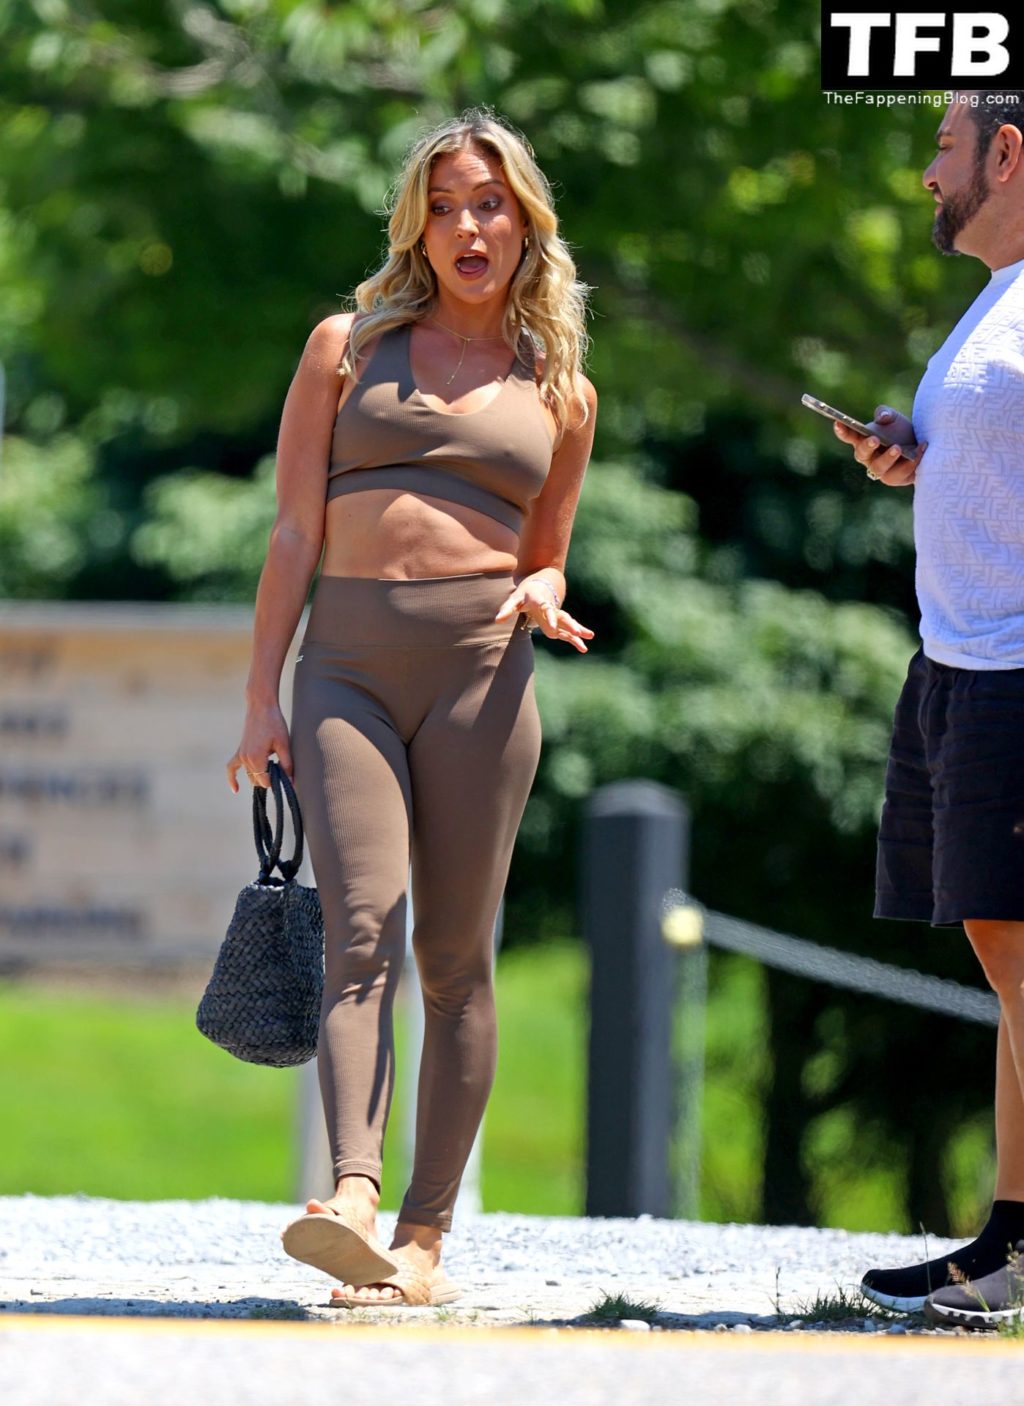 Kristin Cavallari Sexy The Fappening Blog 29 1 1024x1406 - Kristin Cavallari Shows Off Her Abs While Wearing a Brown Athleisure Outfit in East Hampton (47 Photos)